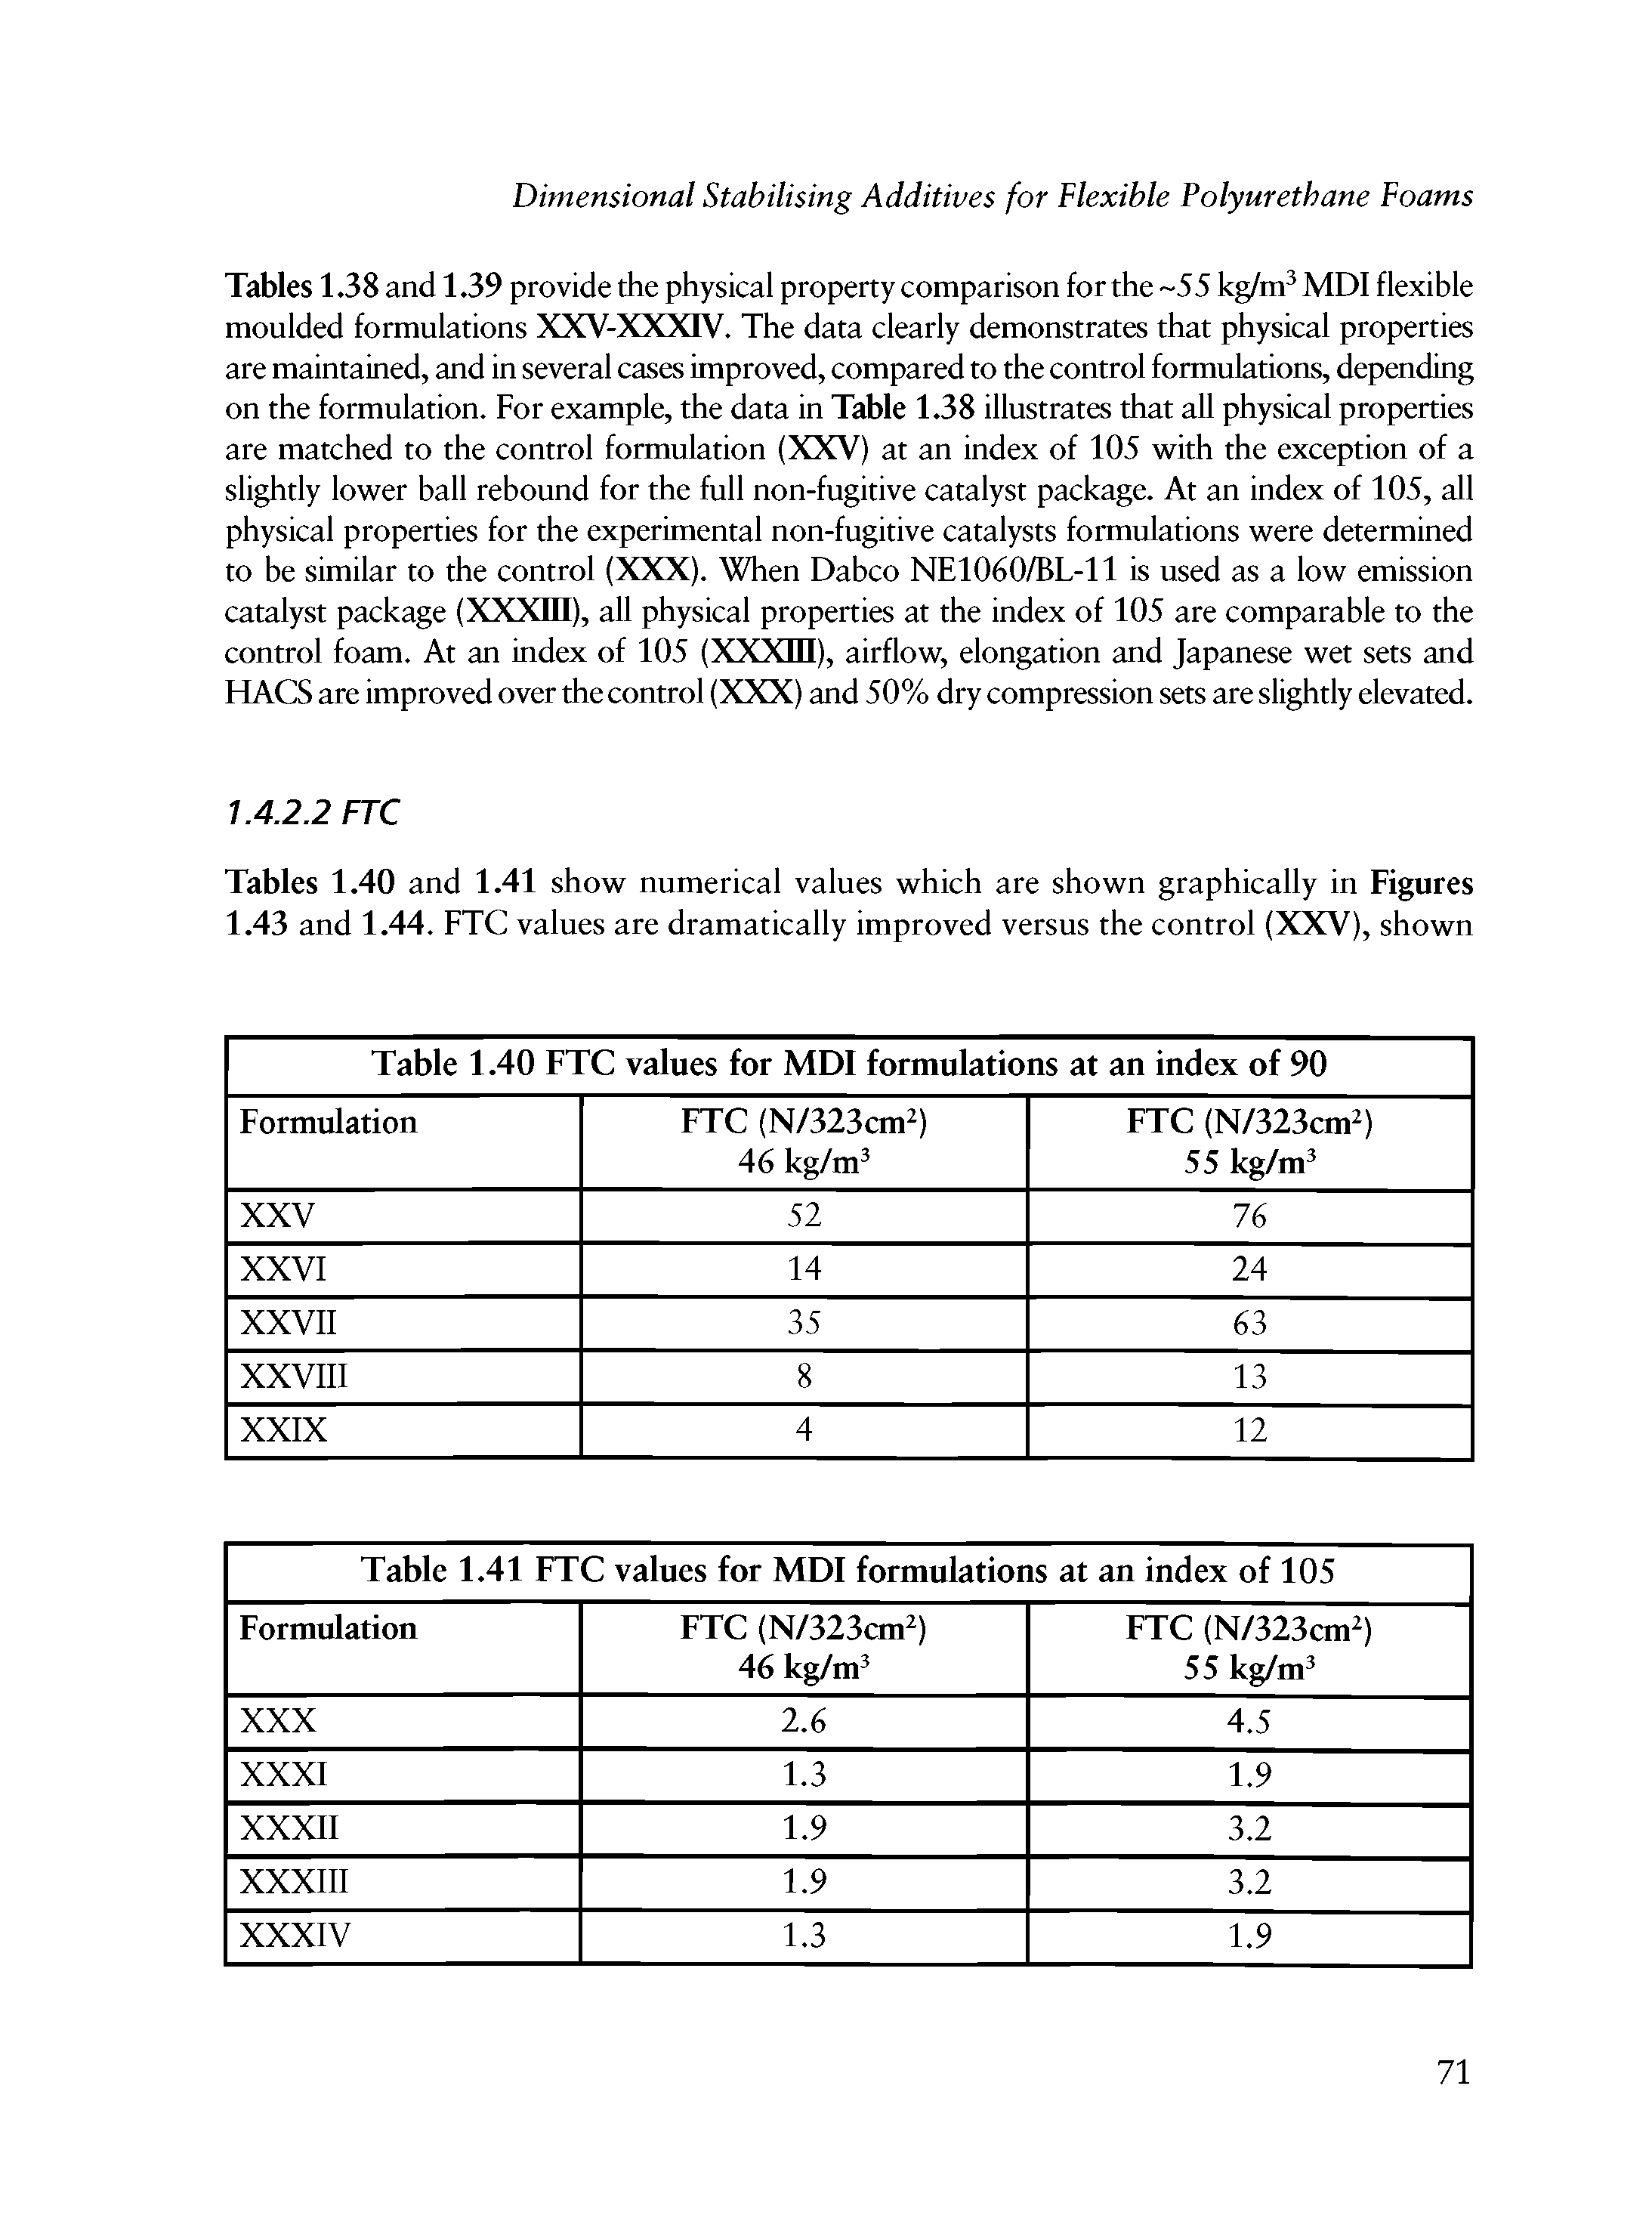 Tables 1.38 and 1.39 provide the physical property comparison for the 55 kg/m MDI flexible moulded formulations XXV-XXXIV. The data clearly demonstrates that physical properties are maintained, and in several cases improved, compared to the control formulations, depending on the formulation. For example, the data in Table 1.38 illustrates that all physical properties are matched to the control formulation (XXV) at an index of 105 with the exception of a slightly lower ball rebound for the full non-fugitive catalyst package. At an index of 105, all physical properties for the experimental non-fugitive catalysts formulations were determined to be similar to the control (XXX). When Dabco NE1060/BL-11 is used as a low emission catalyst package (XXXHI), all physical properties at the index of 105 are comparable to the control foam. At an index of 105 (XXXHI), airflow, elongation and Japanese wet sets and HACS are improved over the control (XXX) and 50% dry compression sets are slightly elevated.